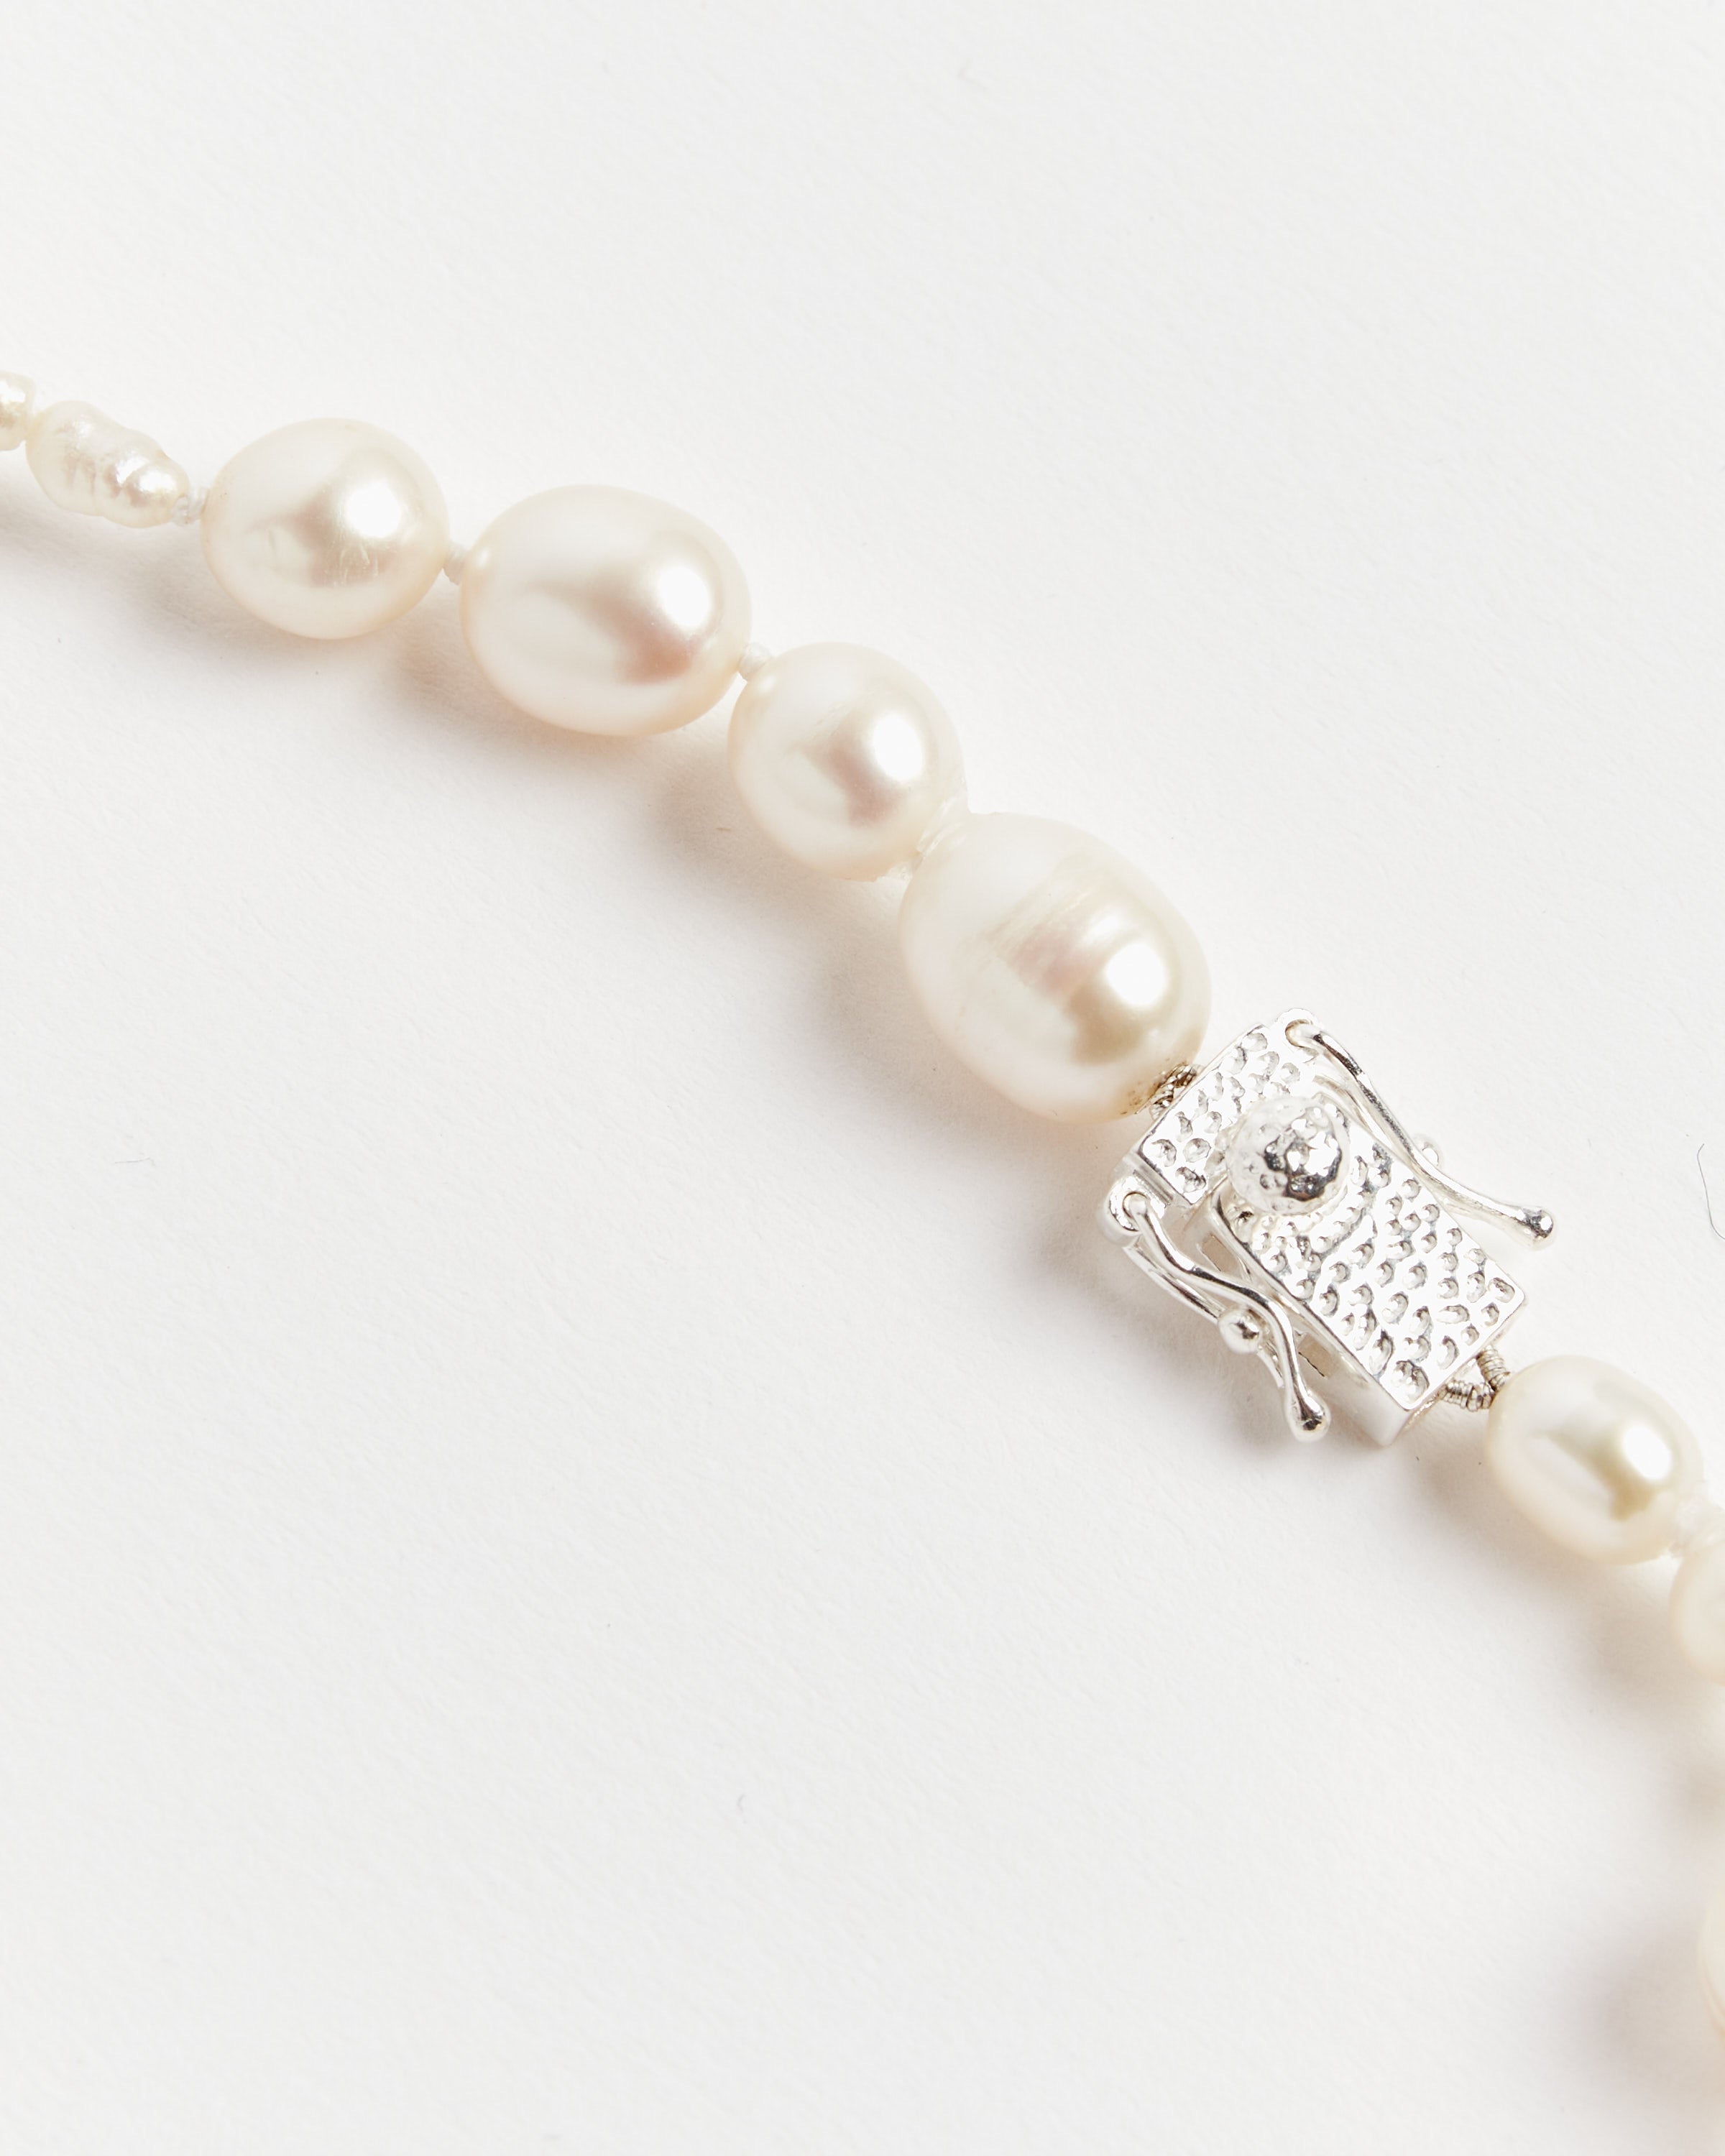 Antique Pearl Necklace in Sterling Silver